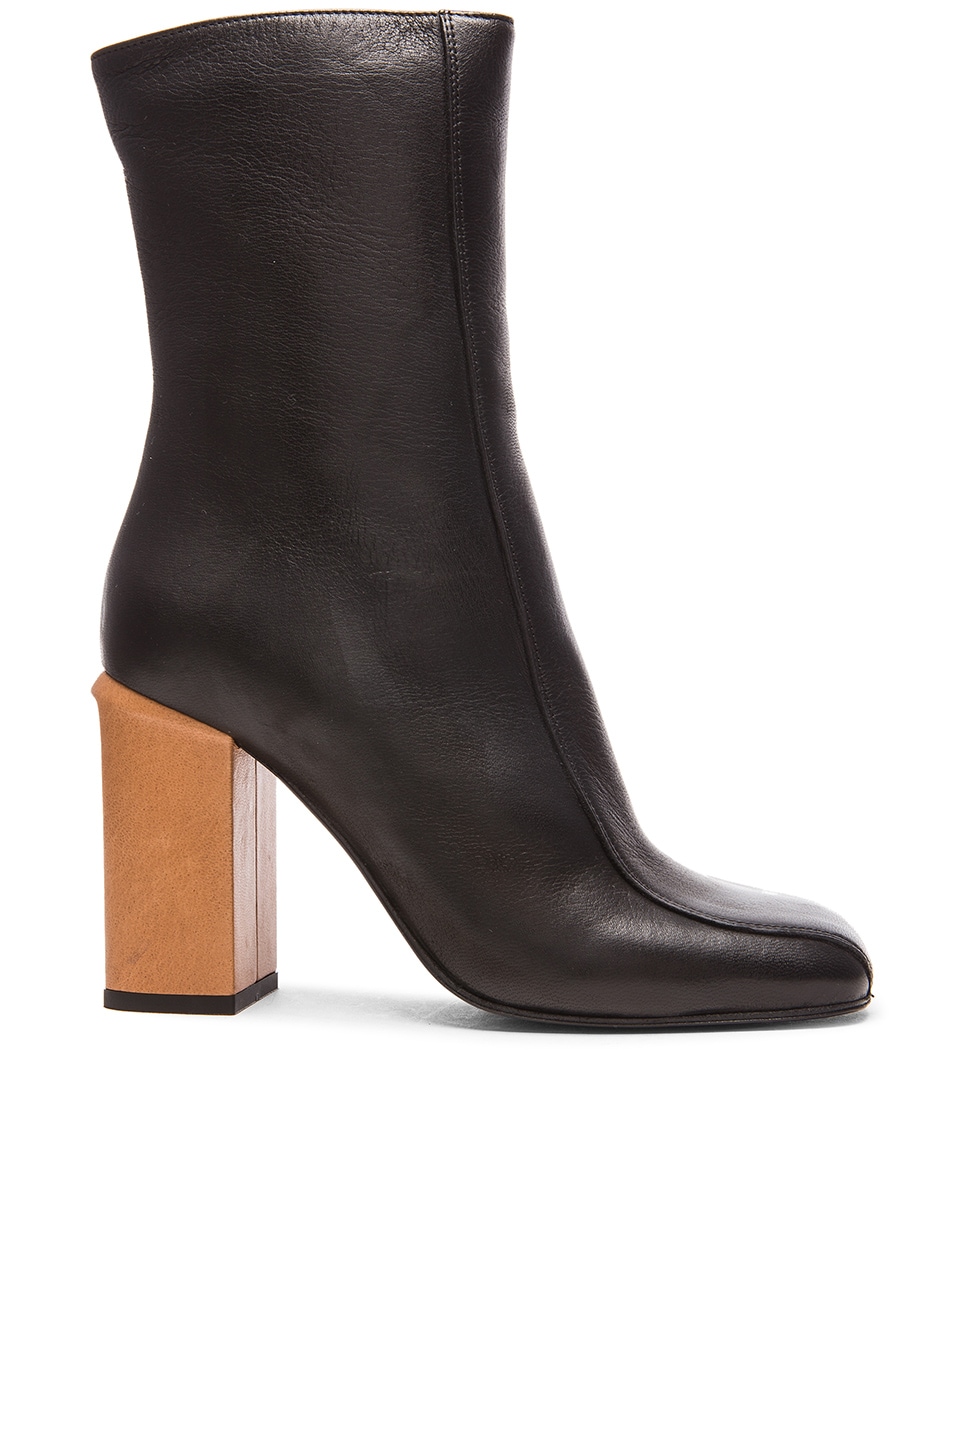 Image 1 of Marni Leather Ankle Boots in Carbone & Cigar